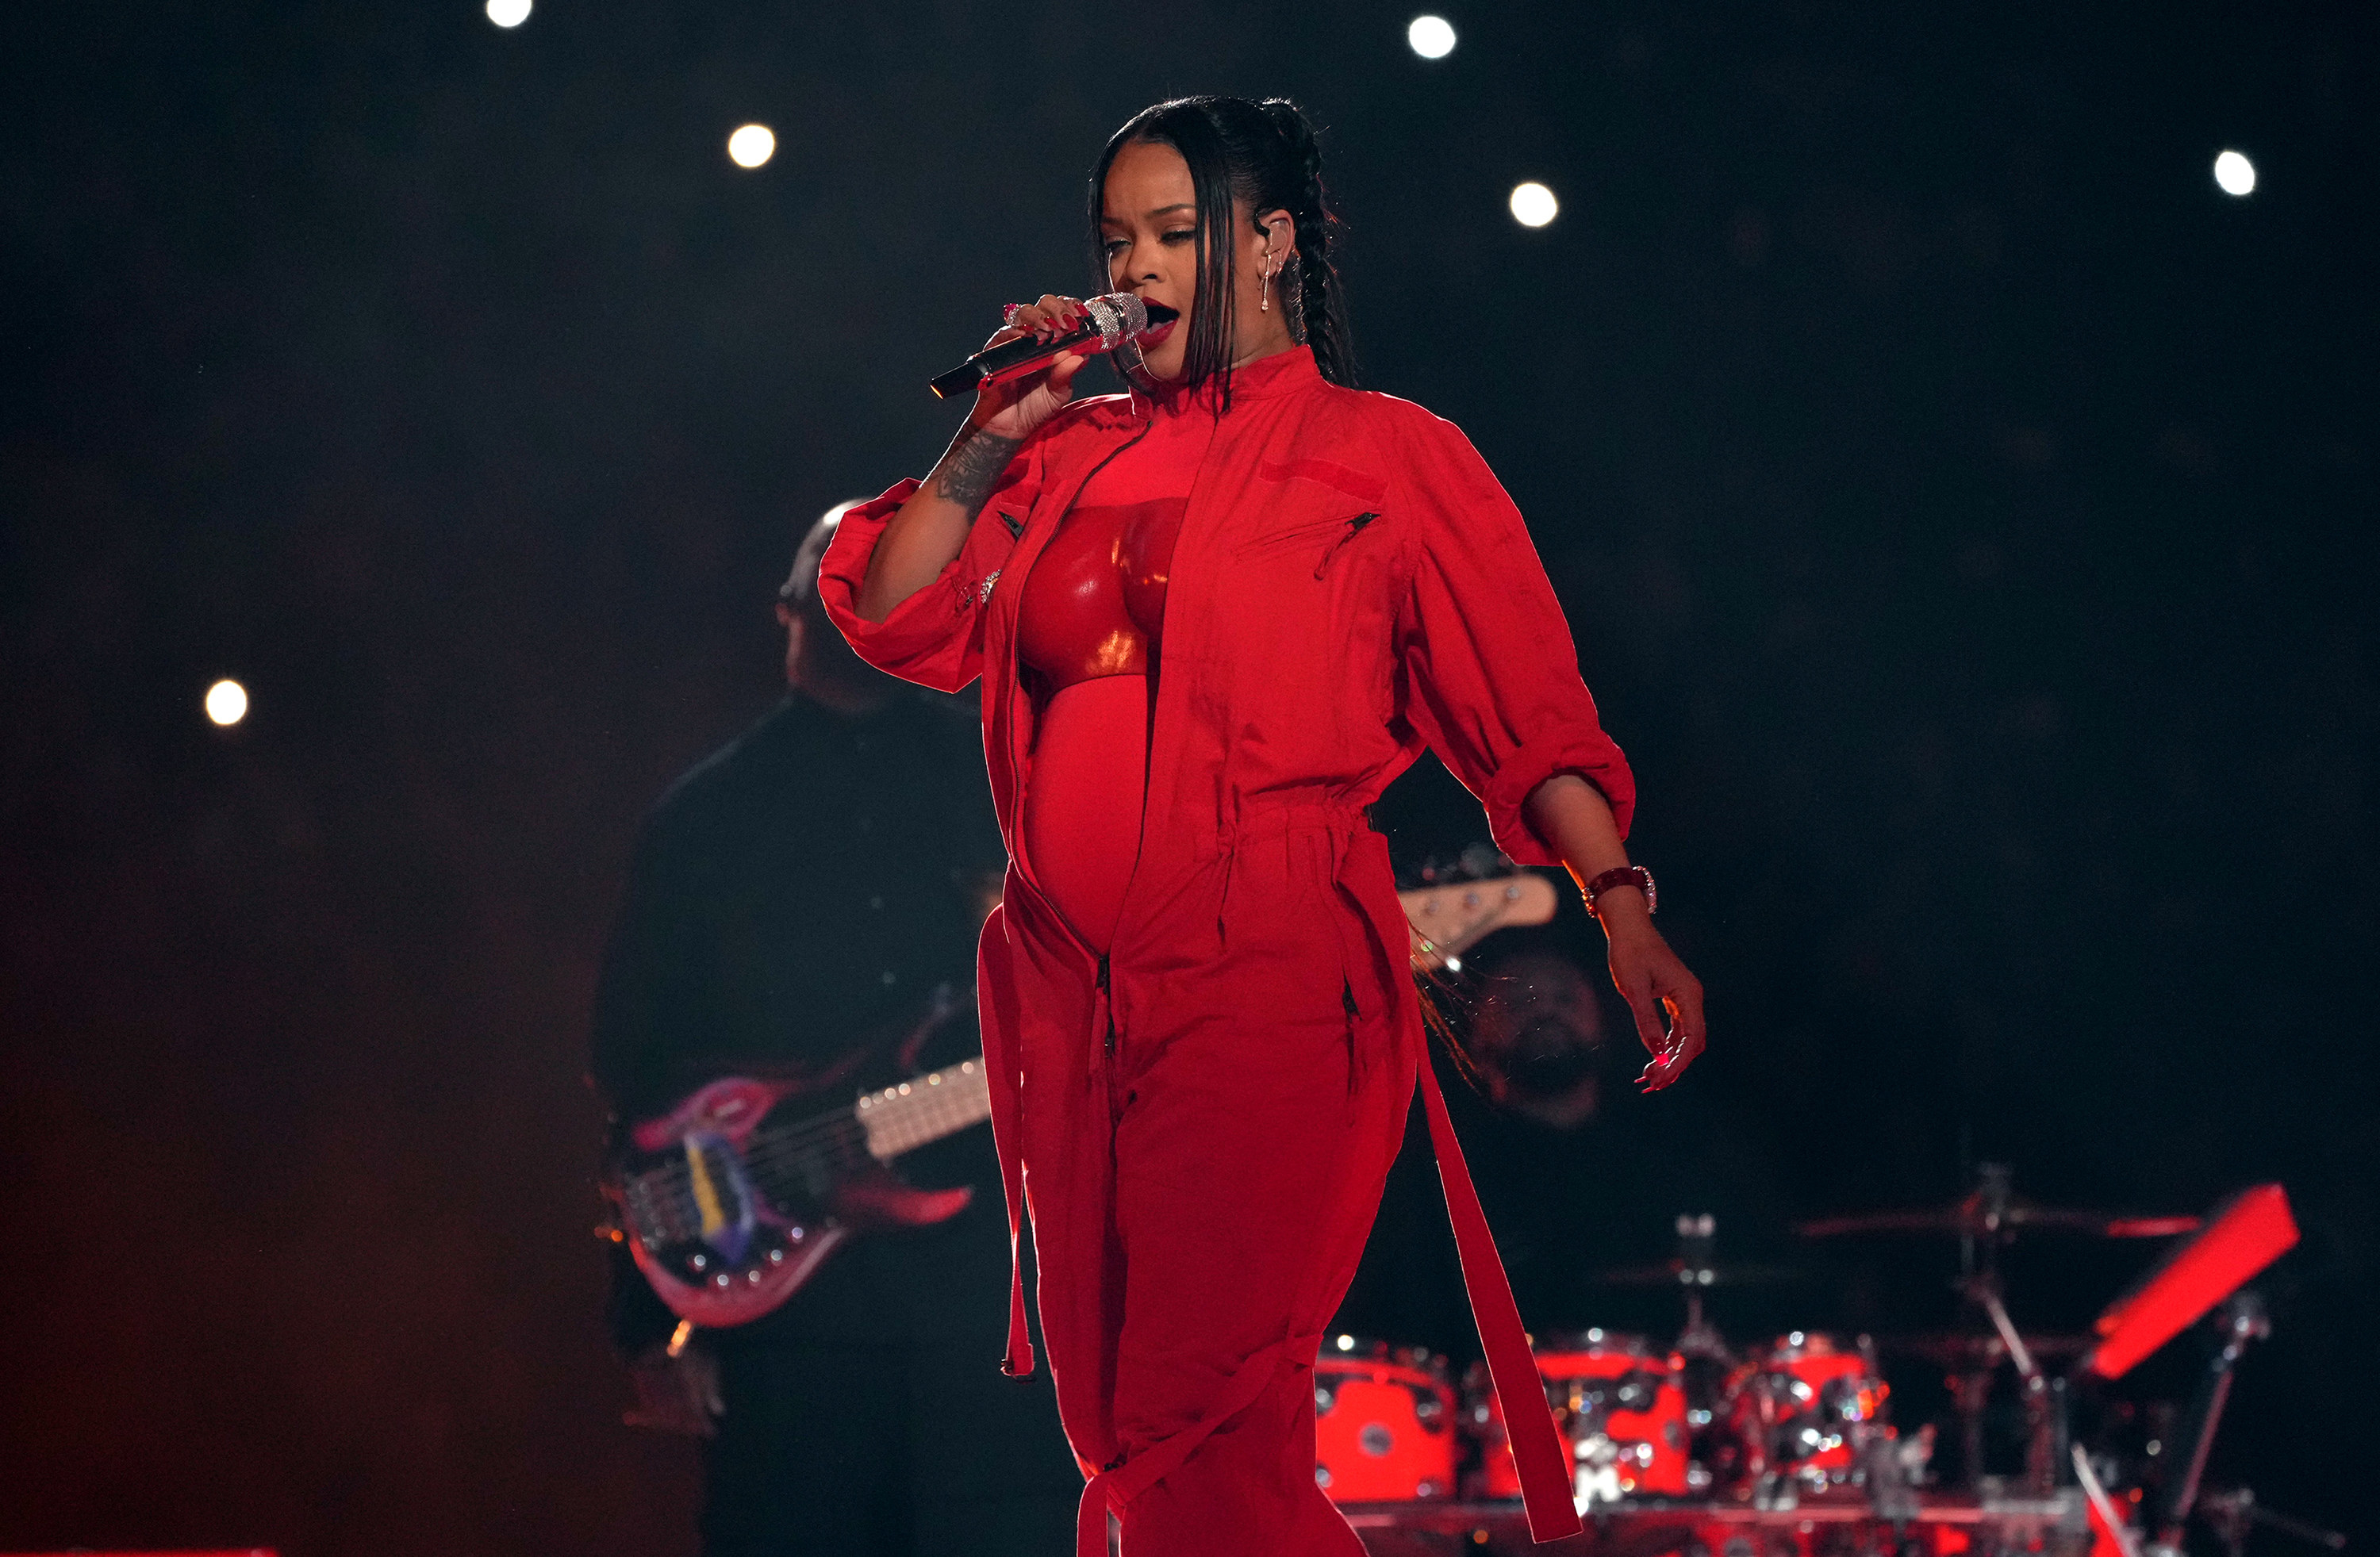 Rihanna&#x27;s baby bump can be seen while she&#x27;s on stage